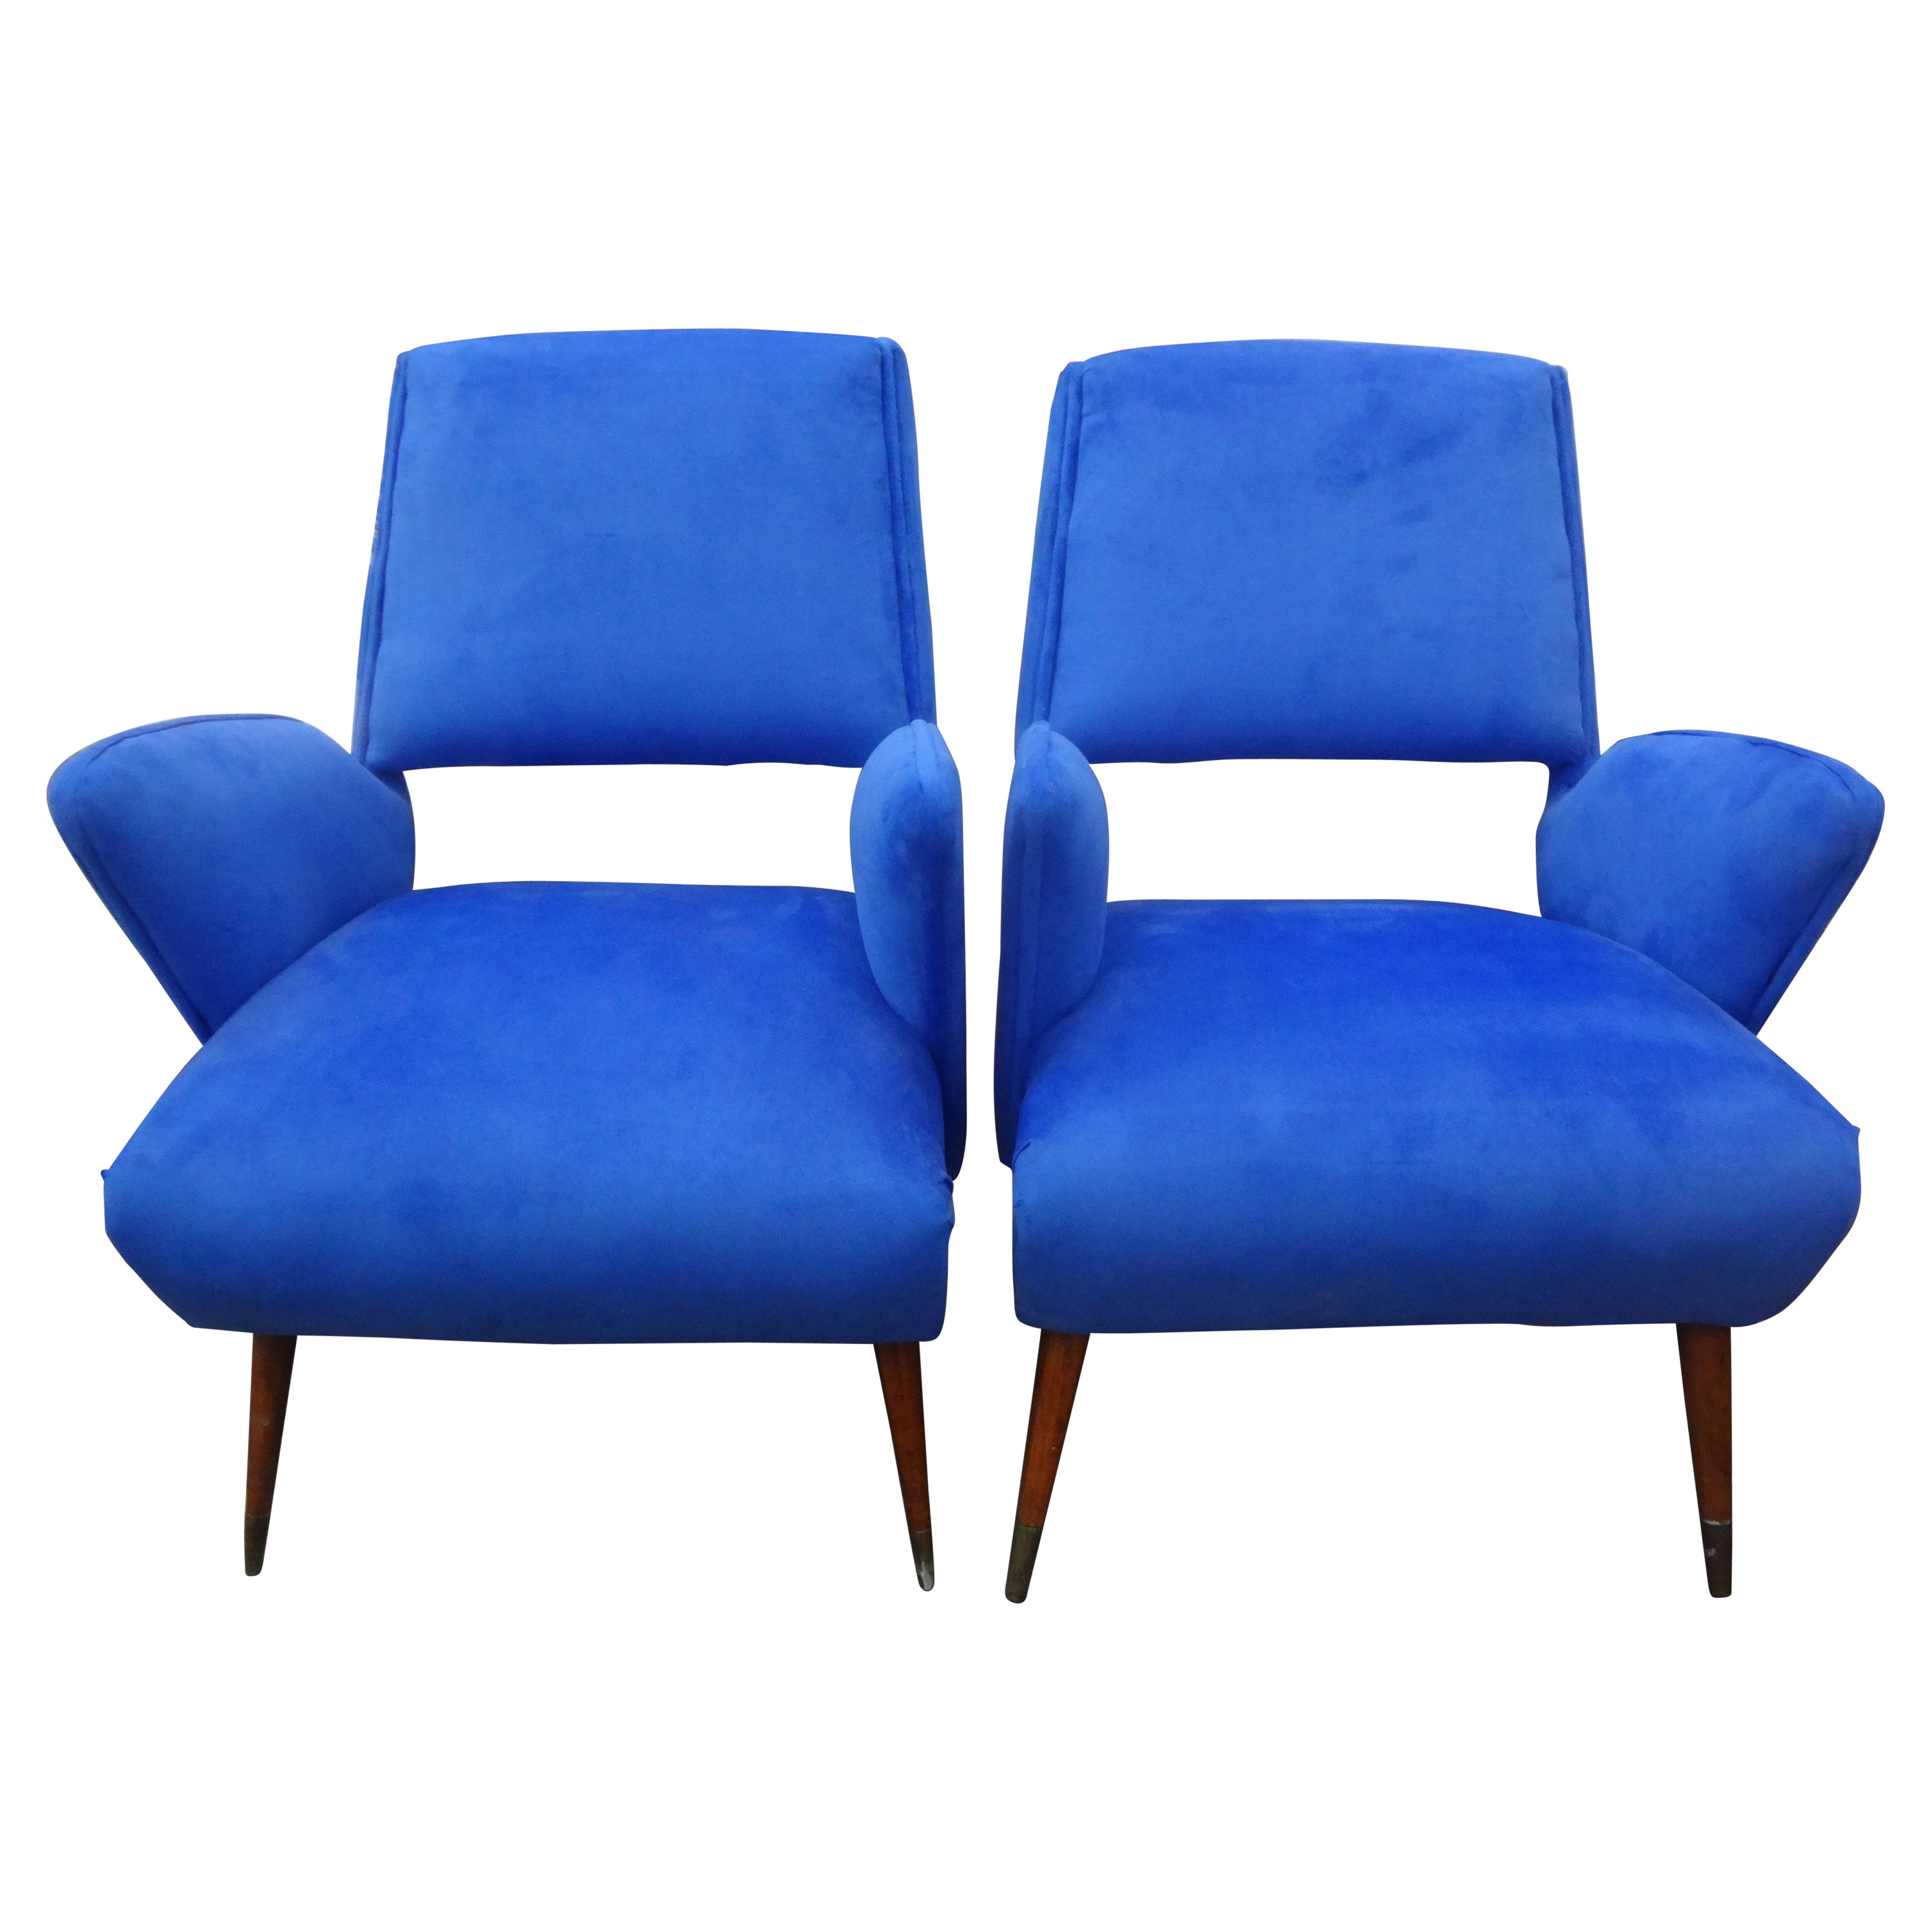 Near Pair of Italian Gio Ponti inspired lounge chairs.
This stunning complementary pair of Italian Mid-Century Modern lounge chairs, club chairs, or side chairs have beautifully tapered legs with brass sabots and an interesting open back. These